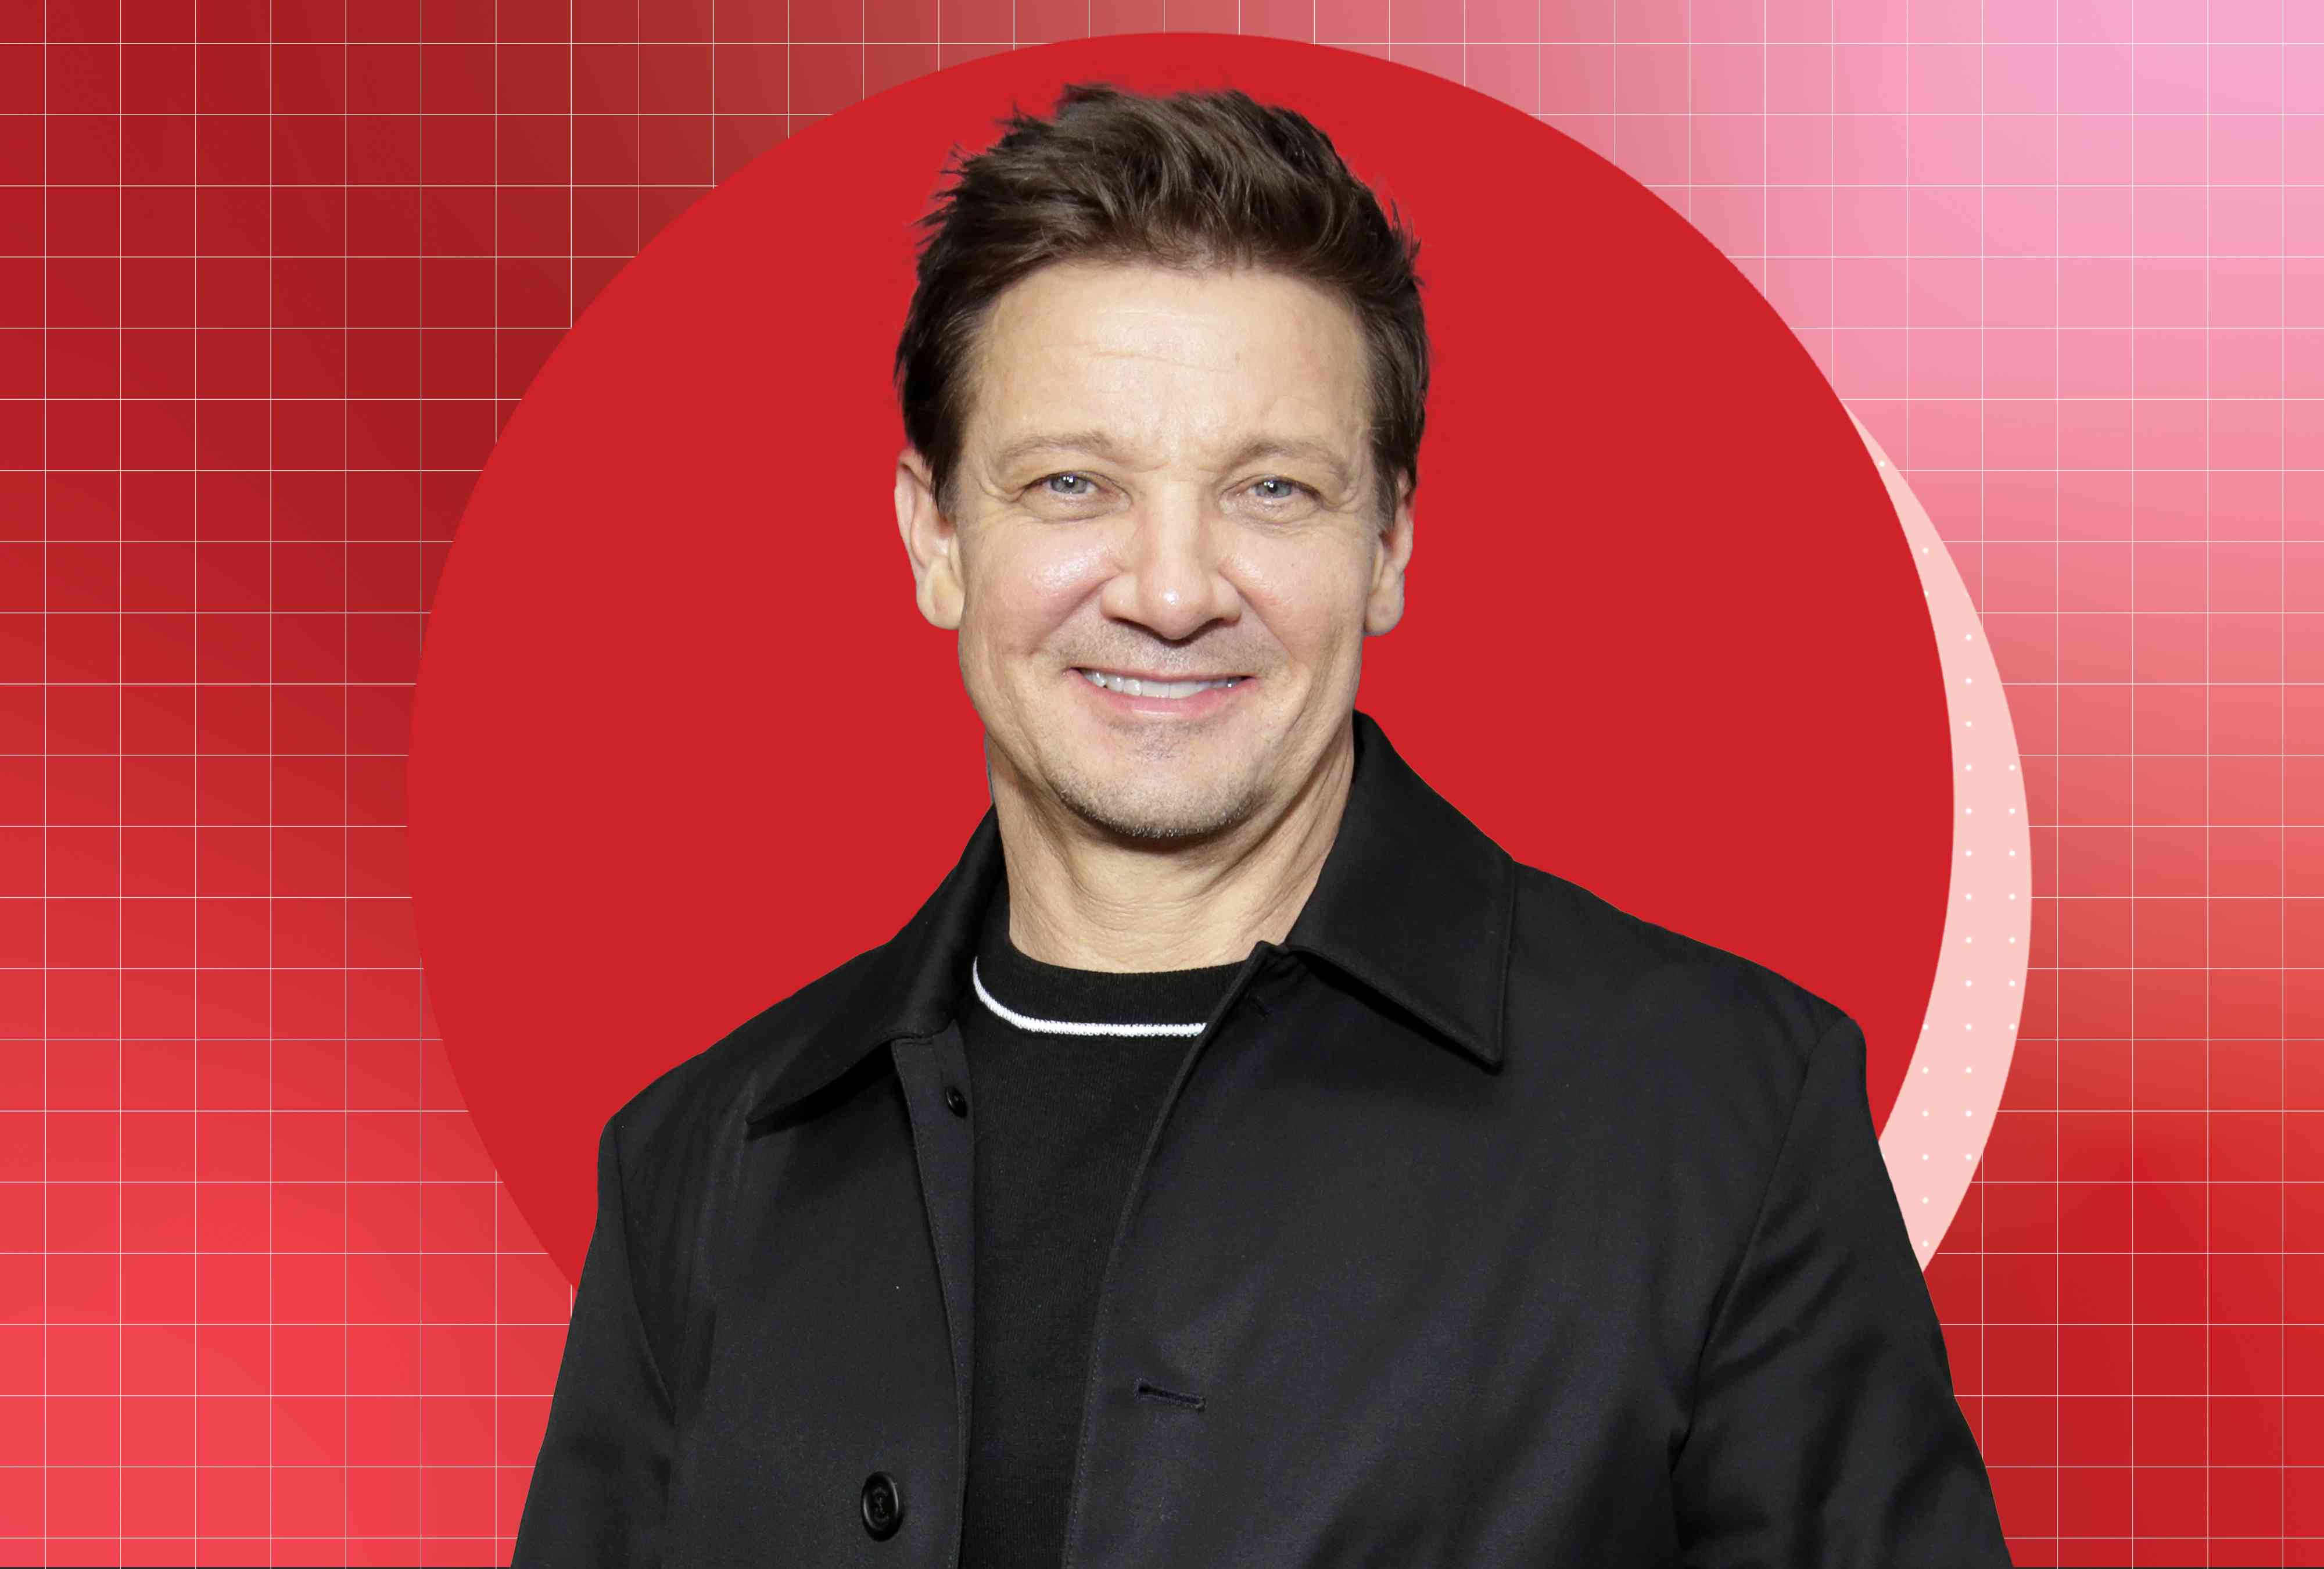 Jeremy Renner Just Told Us His Morning Routine, Including His Go-To High-Protein Breakfast